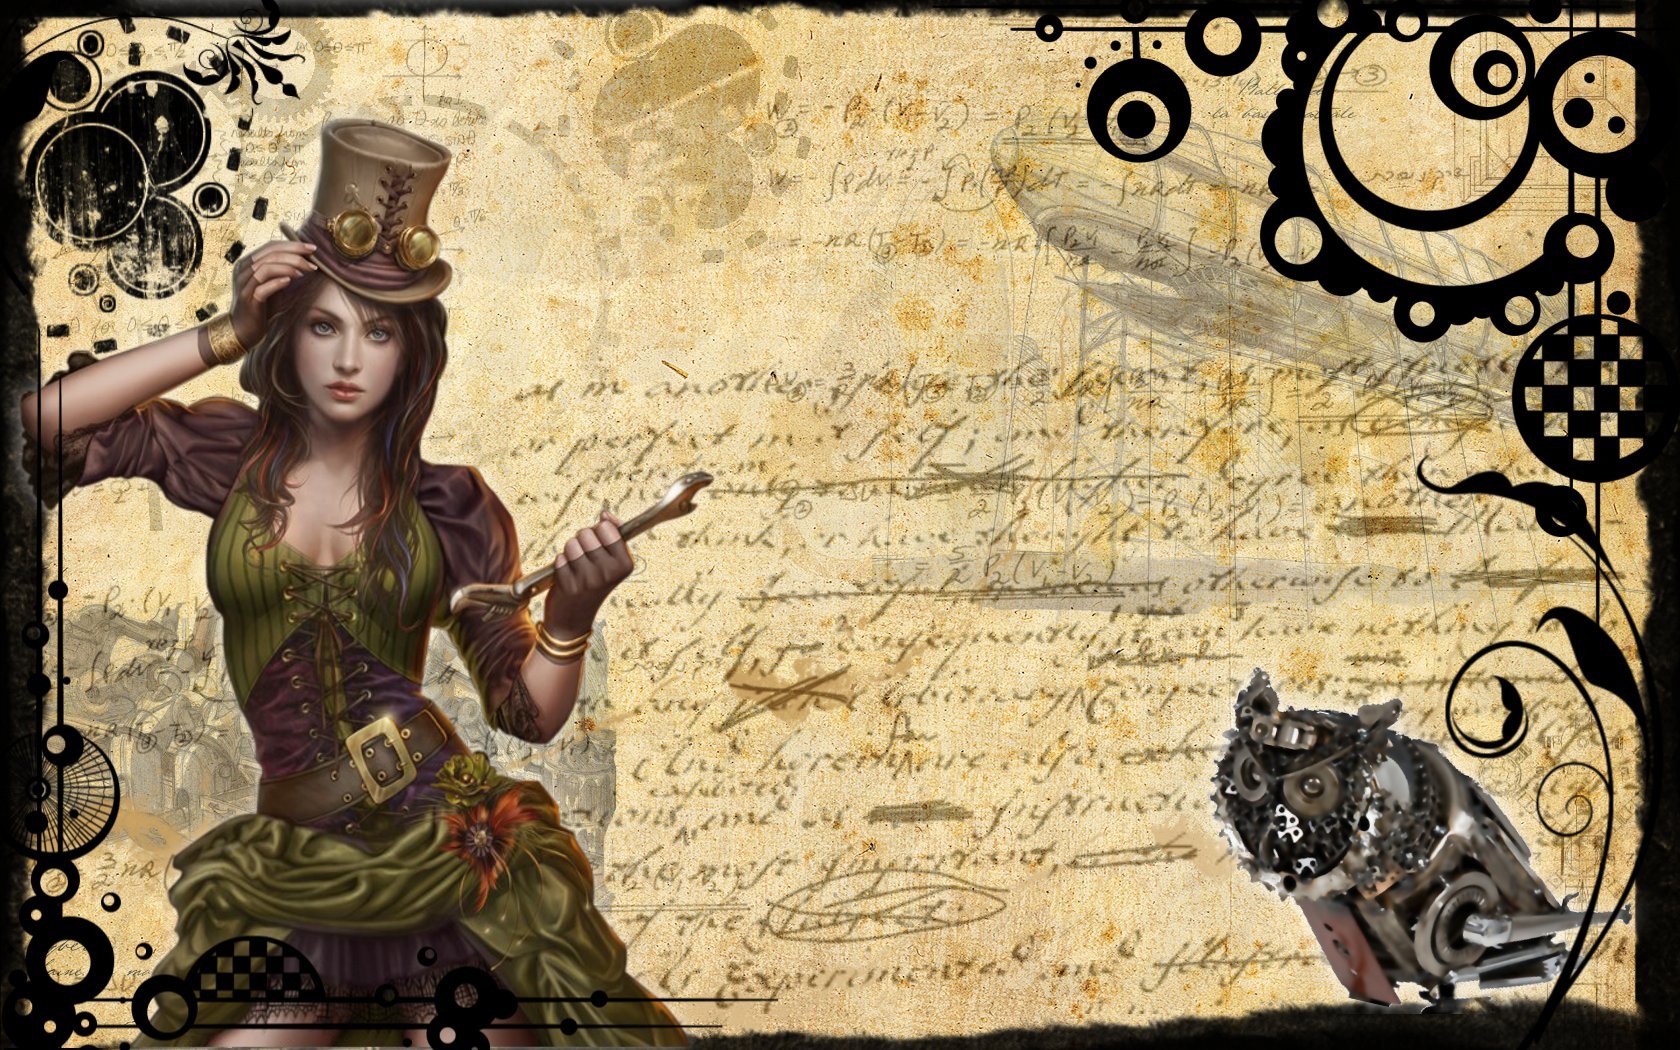 Download SteamPunk Wallpapers Pictures Photos and Backgrounds 1680x1050